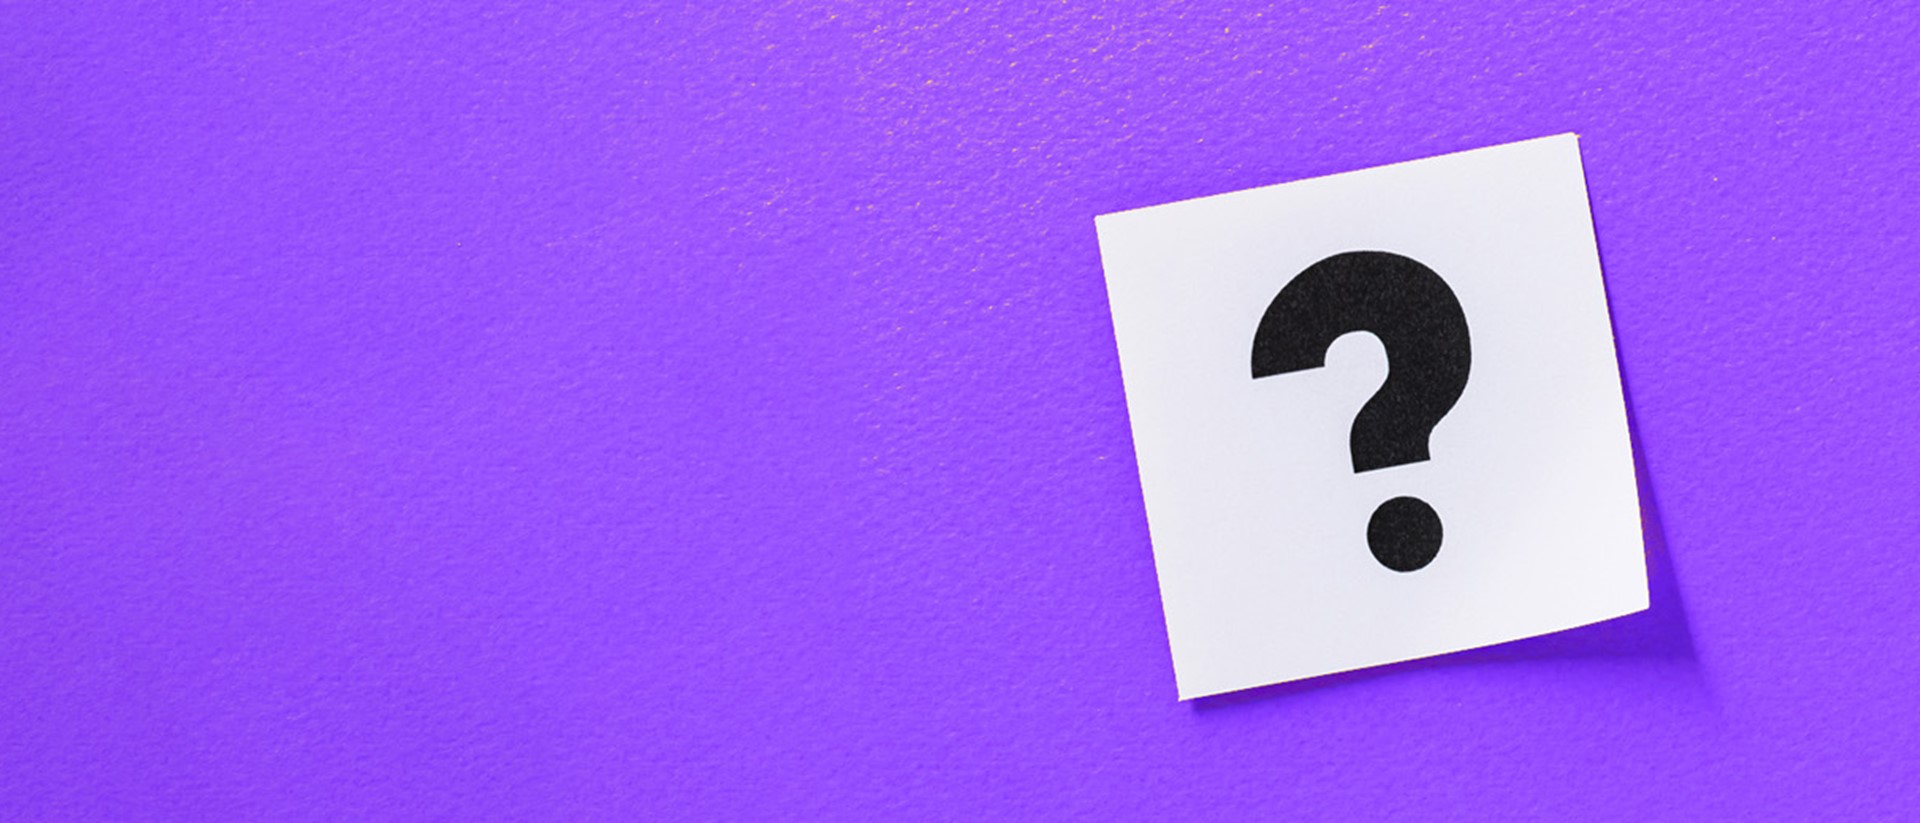 A question mark on a white sticky note against a purple background